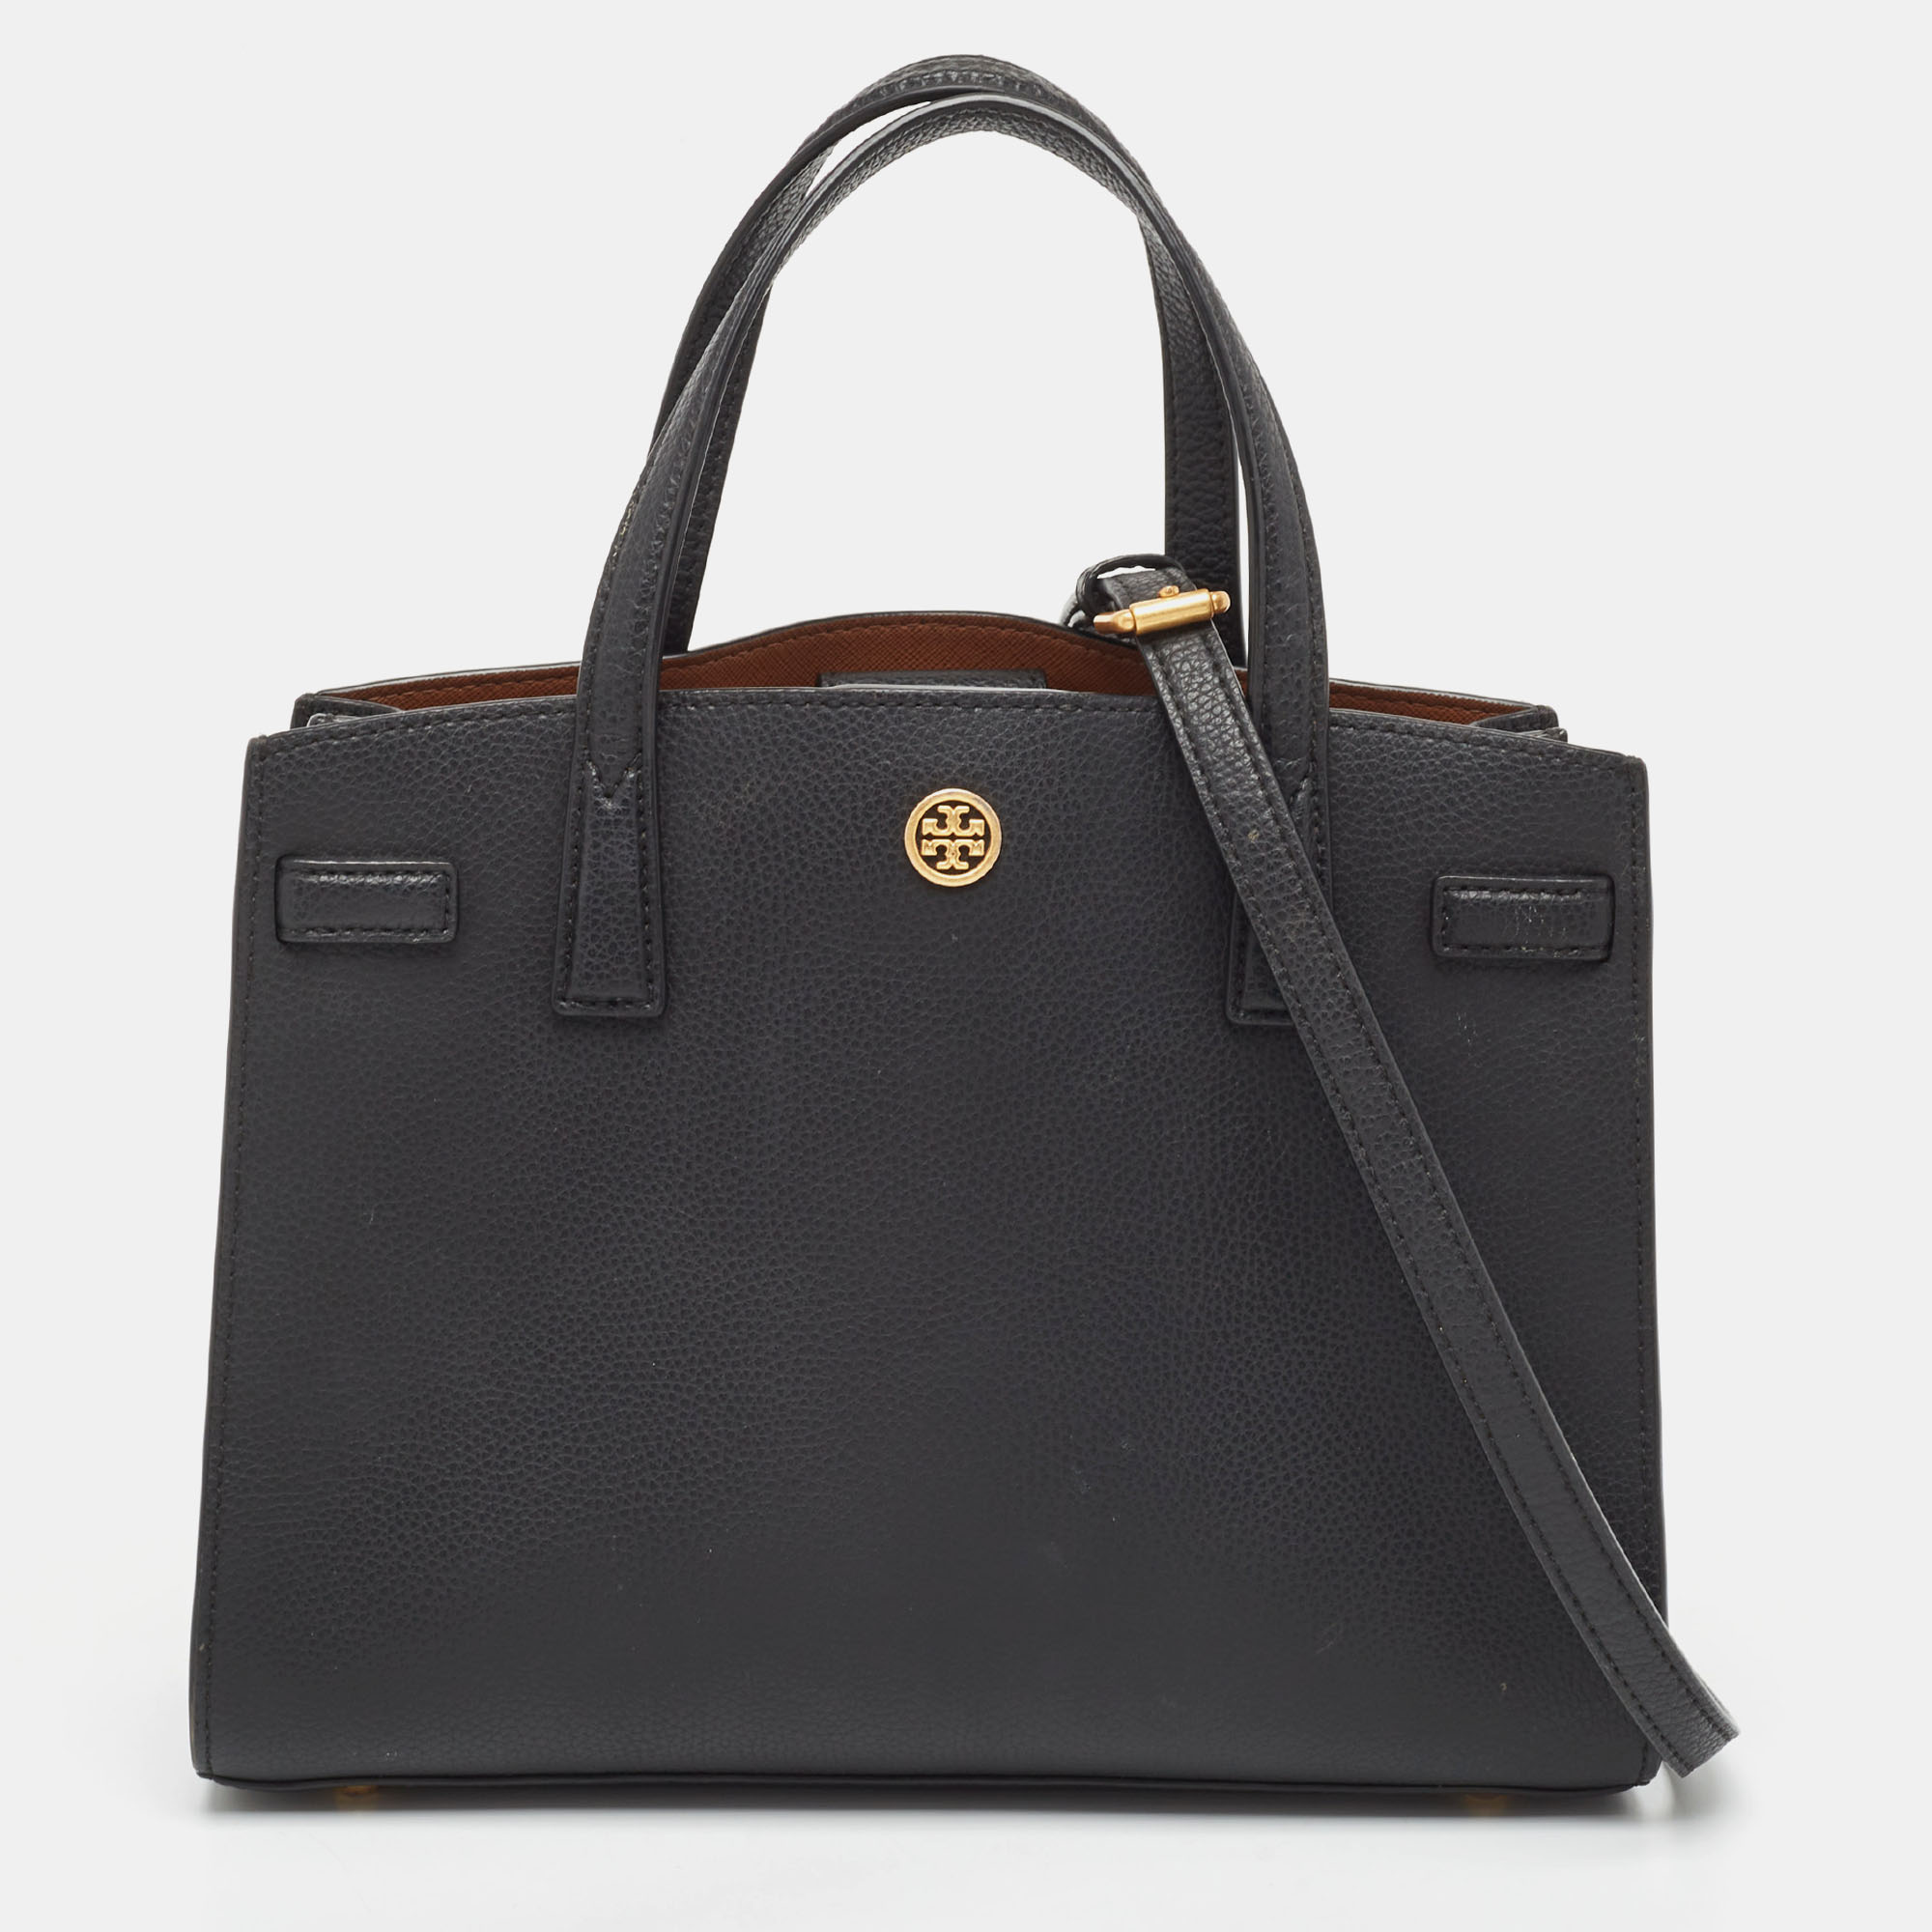 Pre-owned Tory Burch Black Leather Walker Tote